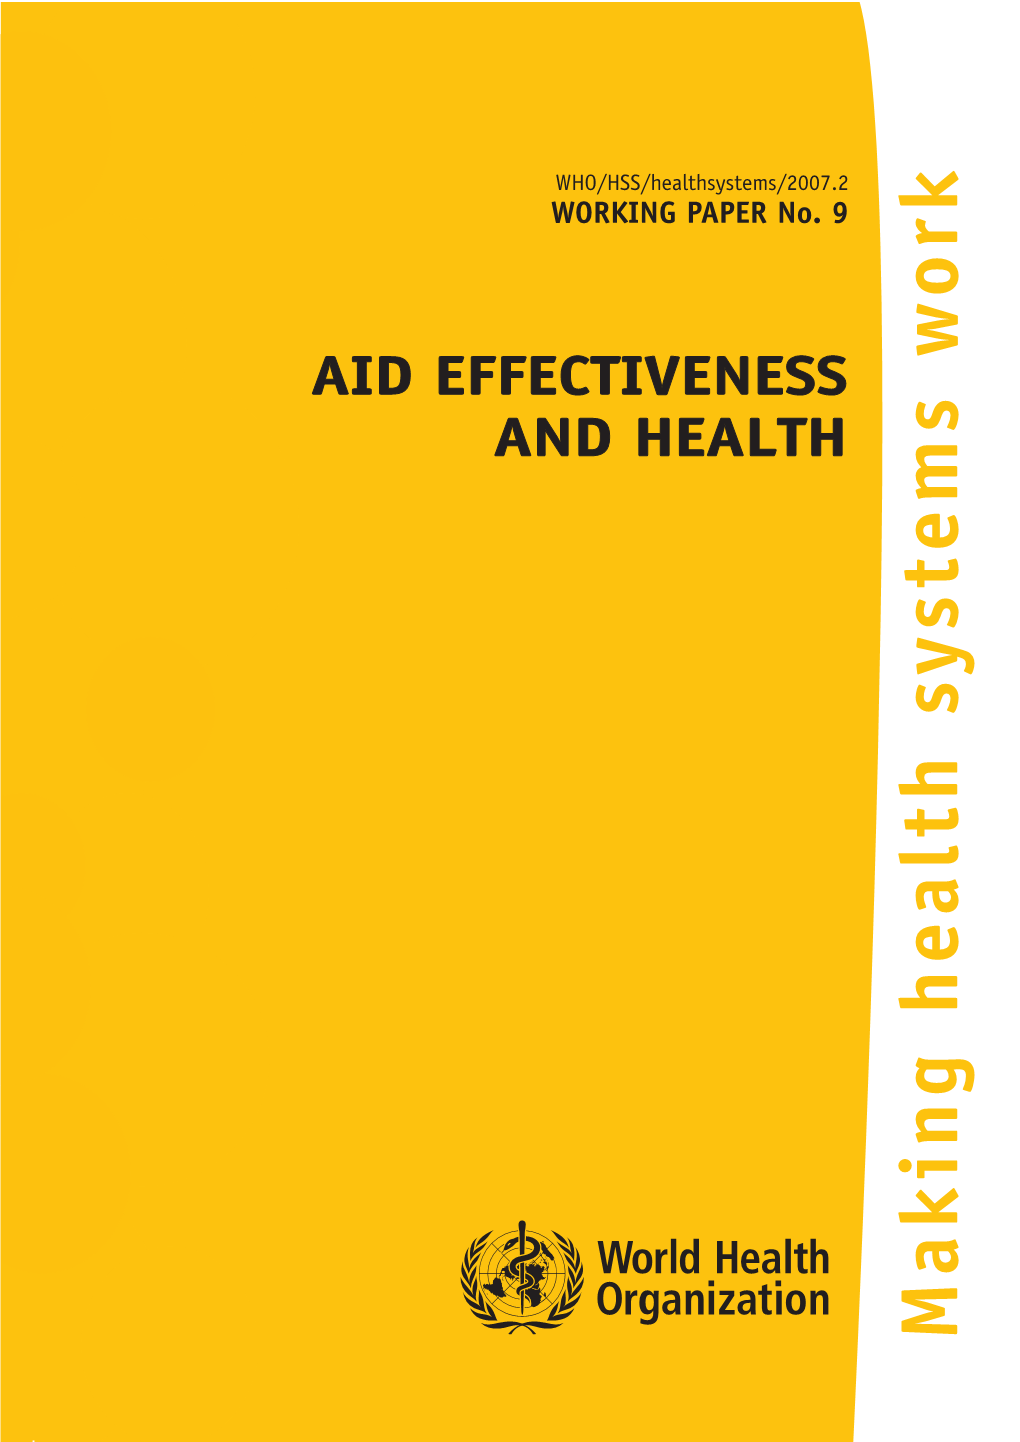 “Aid Effectiveness and Health: Making Health Systems Work”, Working